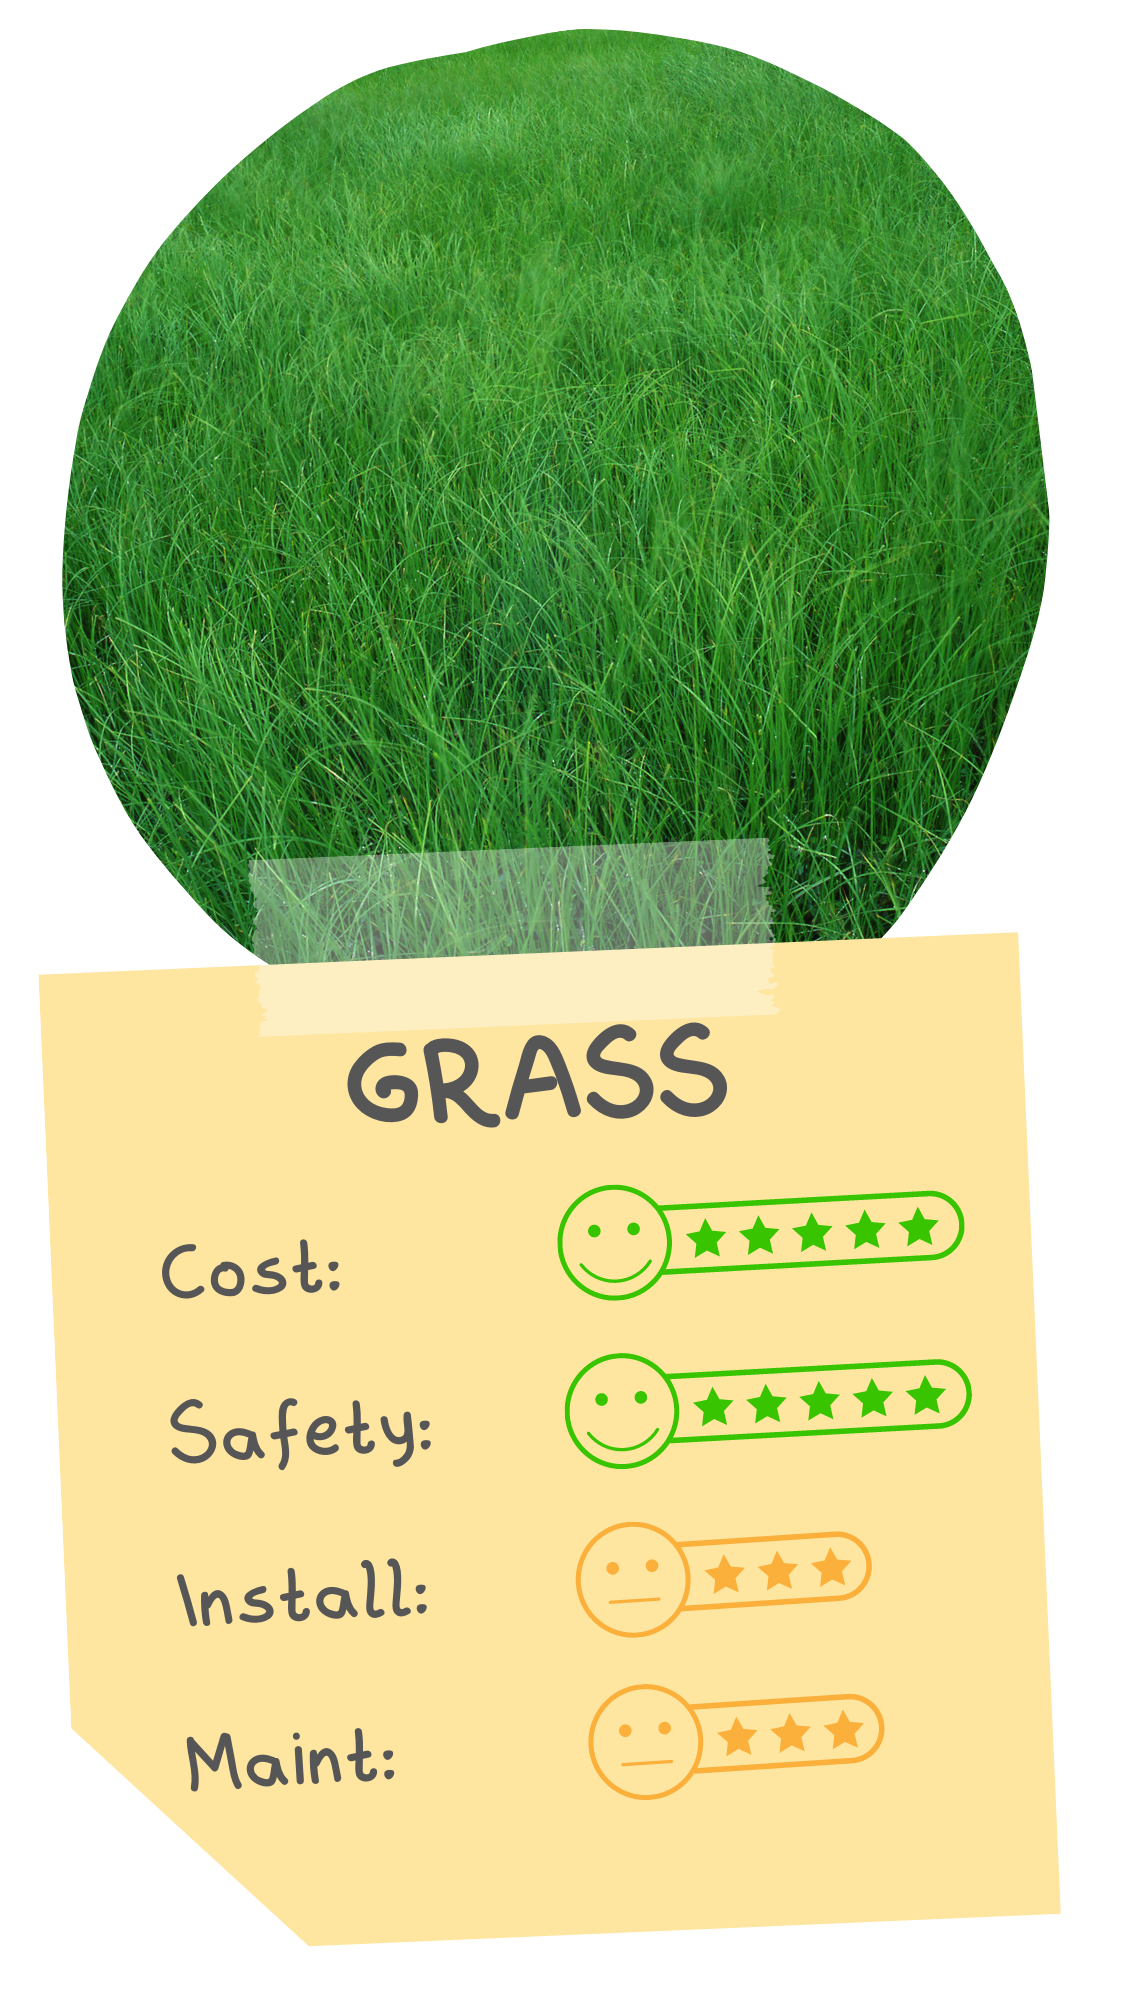 Grass is rated by four categories. It receives 5 stars for cost, 5 stars for safety, 3 stars for installation, and 3 stars for maintenance.